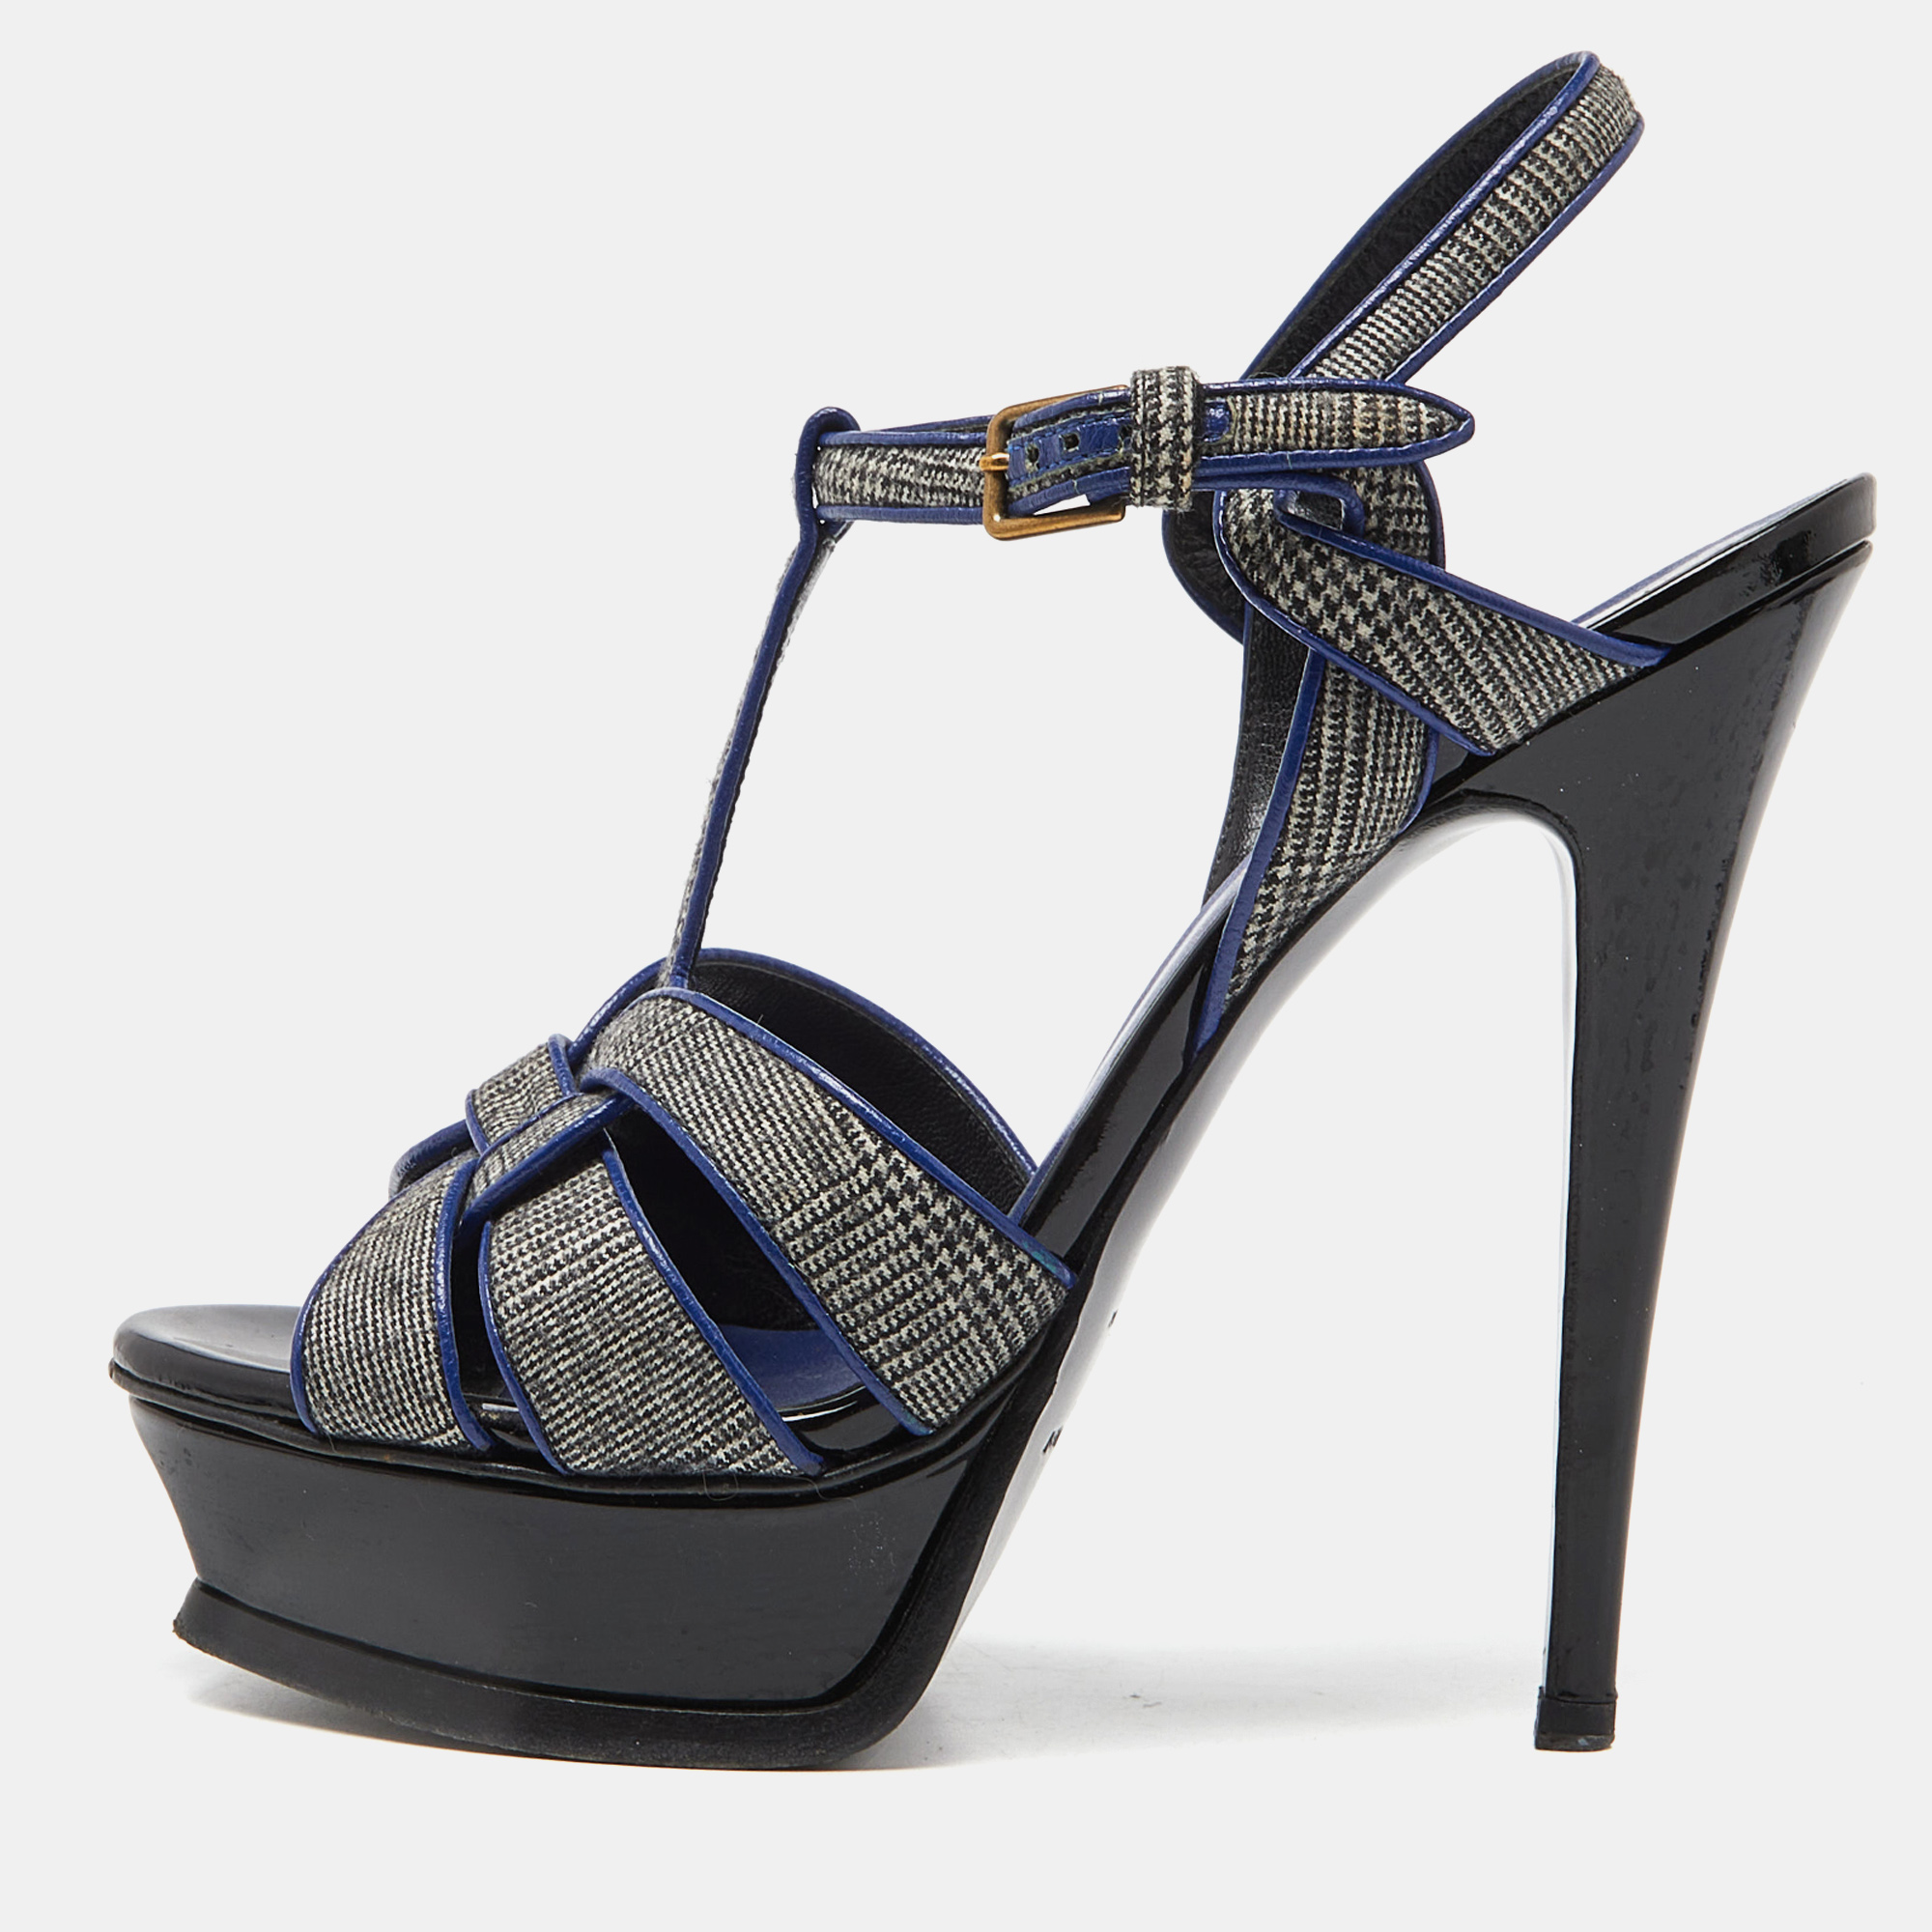 Yves saint laurent grey/blue fabric and leather tribute ankle strap sandals size 37.5